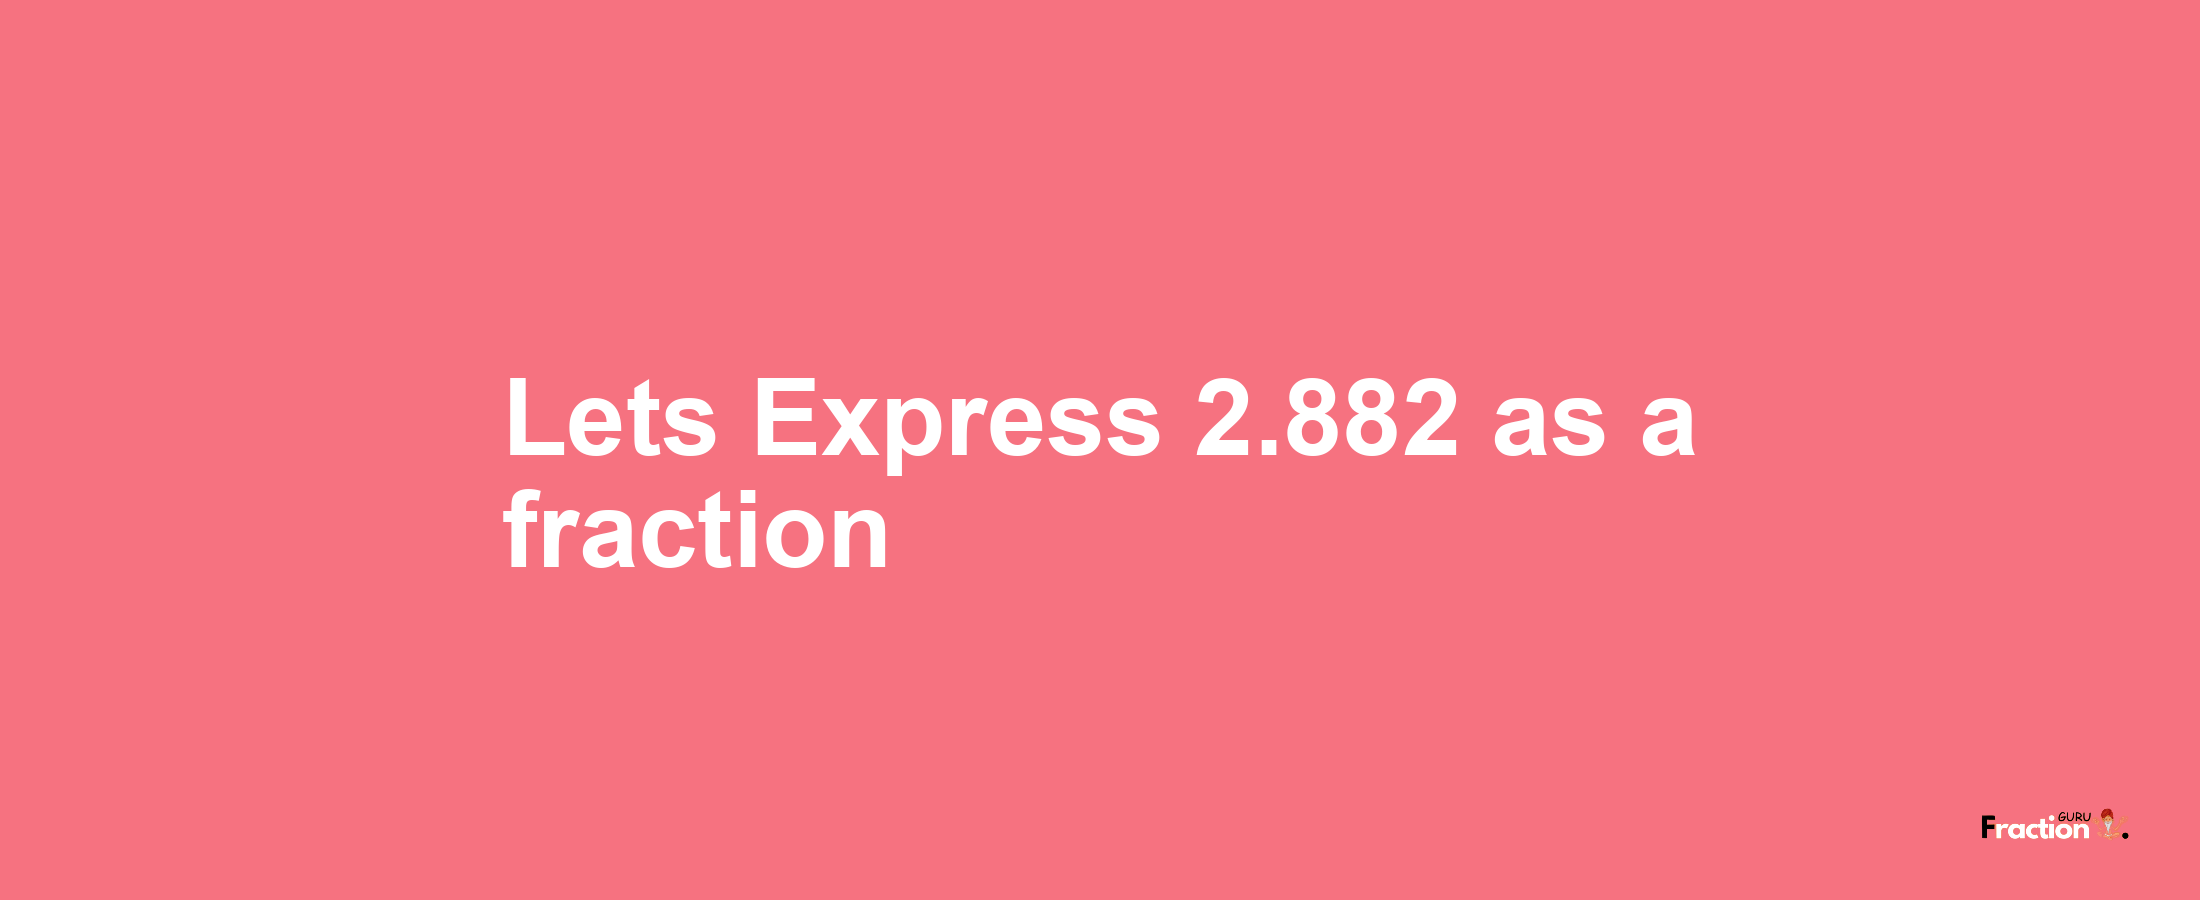 Lets Express 2.882 as afraction